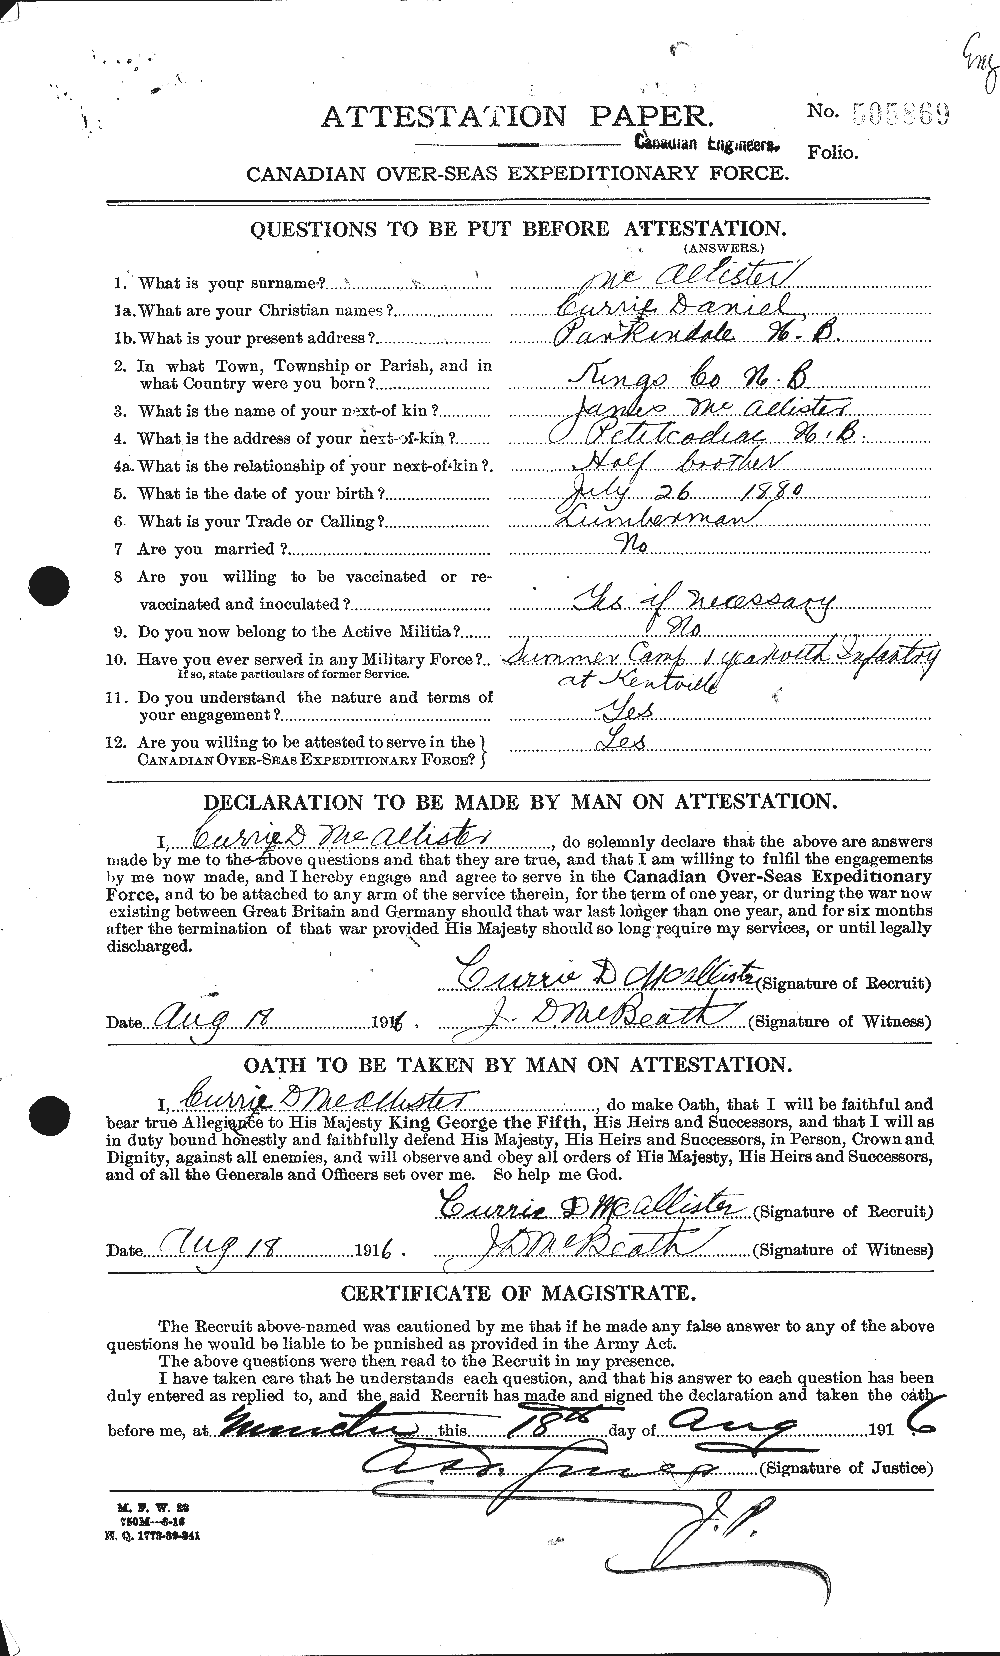 Personnel Records of the First World War - CEF 513168a